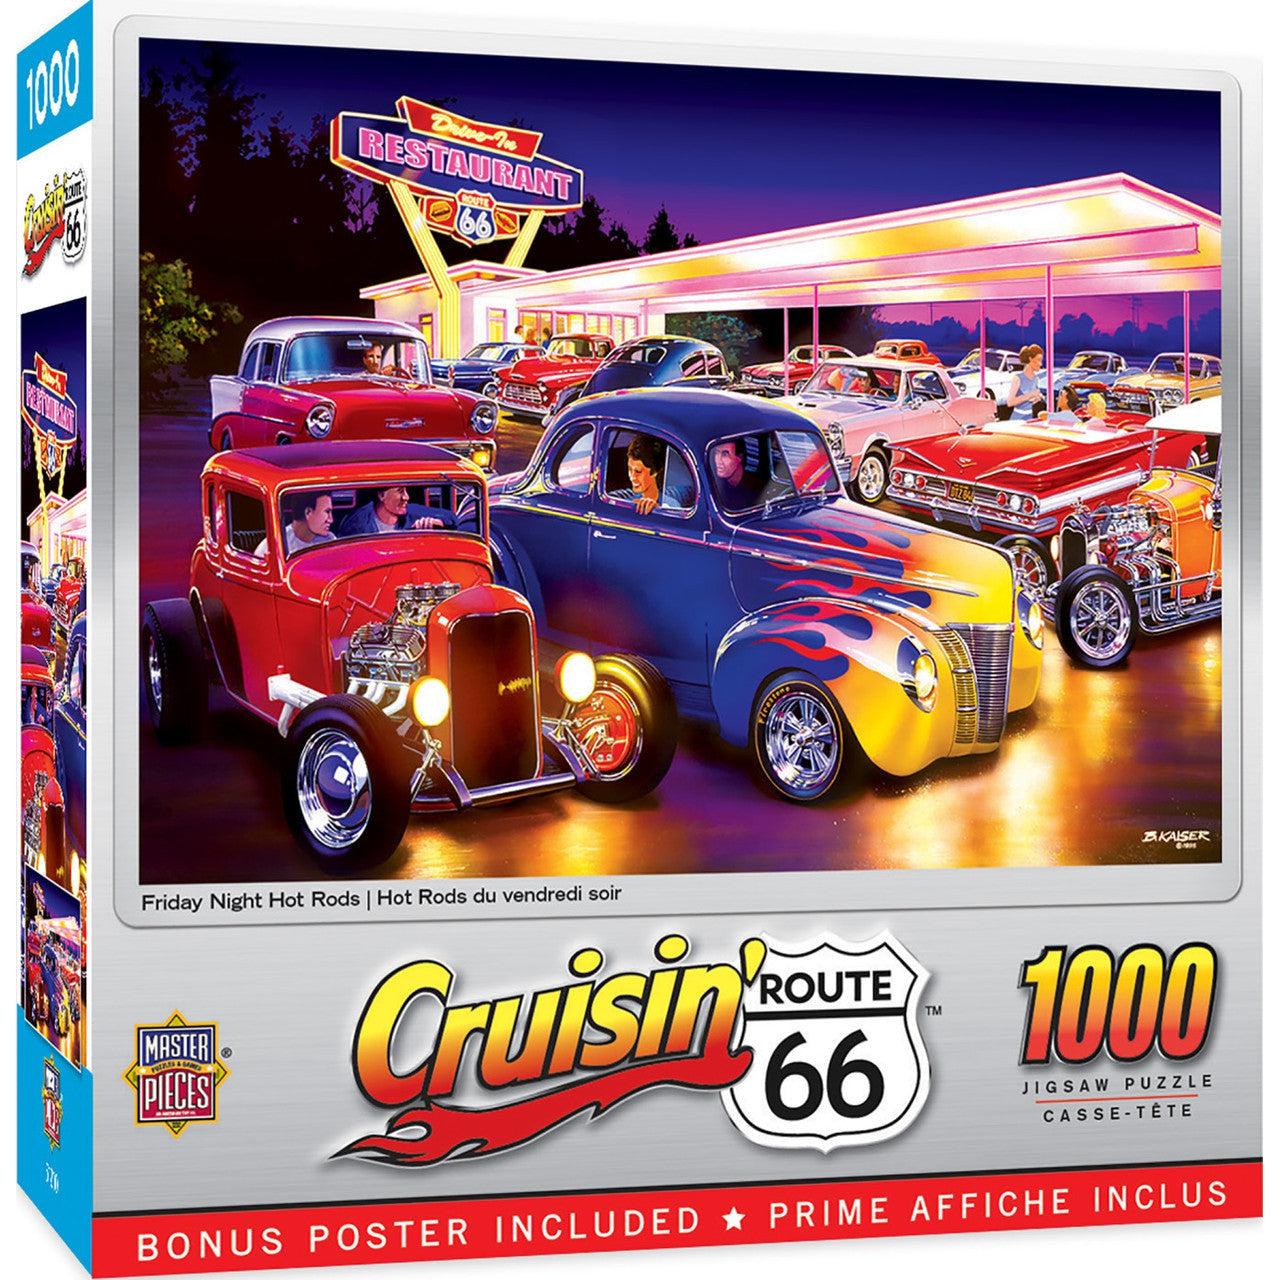 MasterPieces-Cruisin‘ Route 66 - Friday Night Hot Rod's - 1000 Piece Puzzle-71951-Legacy Toys